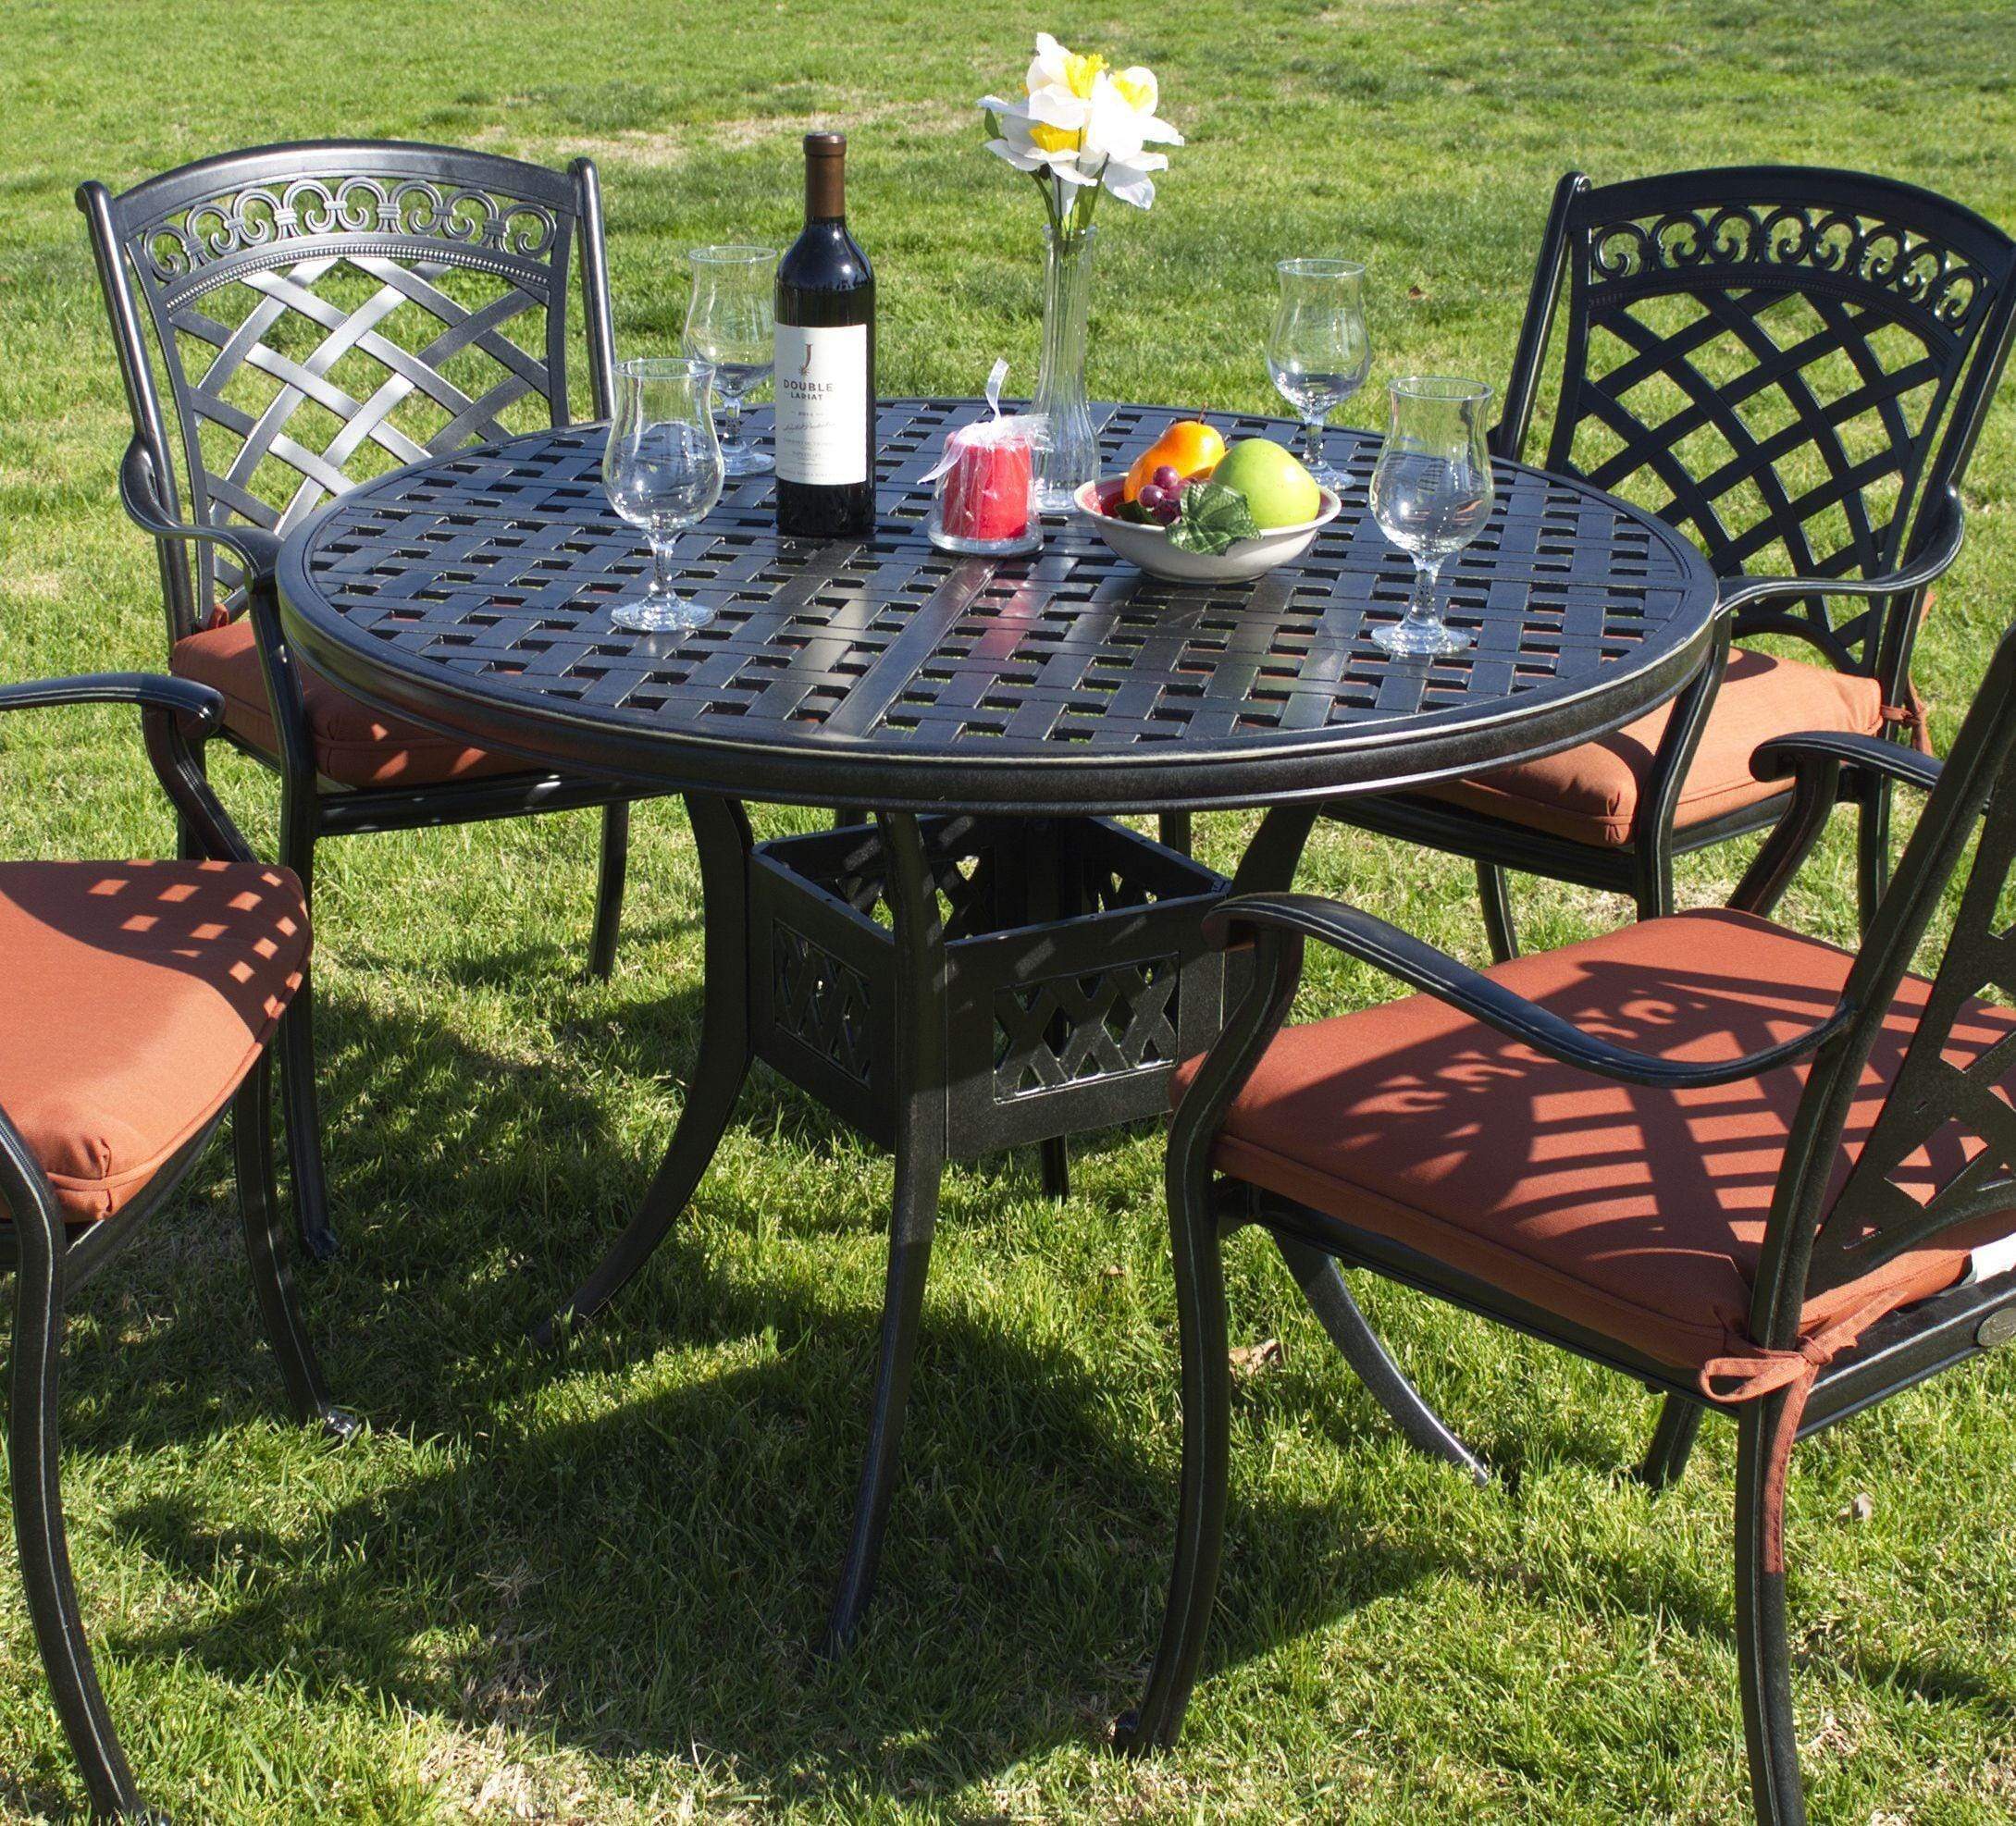 Lawton Casual Comfort Outdoor Dining Set Lawton Casual Comfort - Simoneau Tropez 5 Piece Dining Set with Cushions